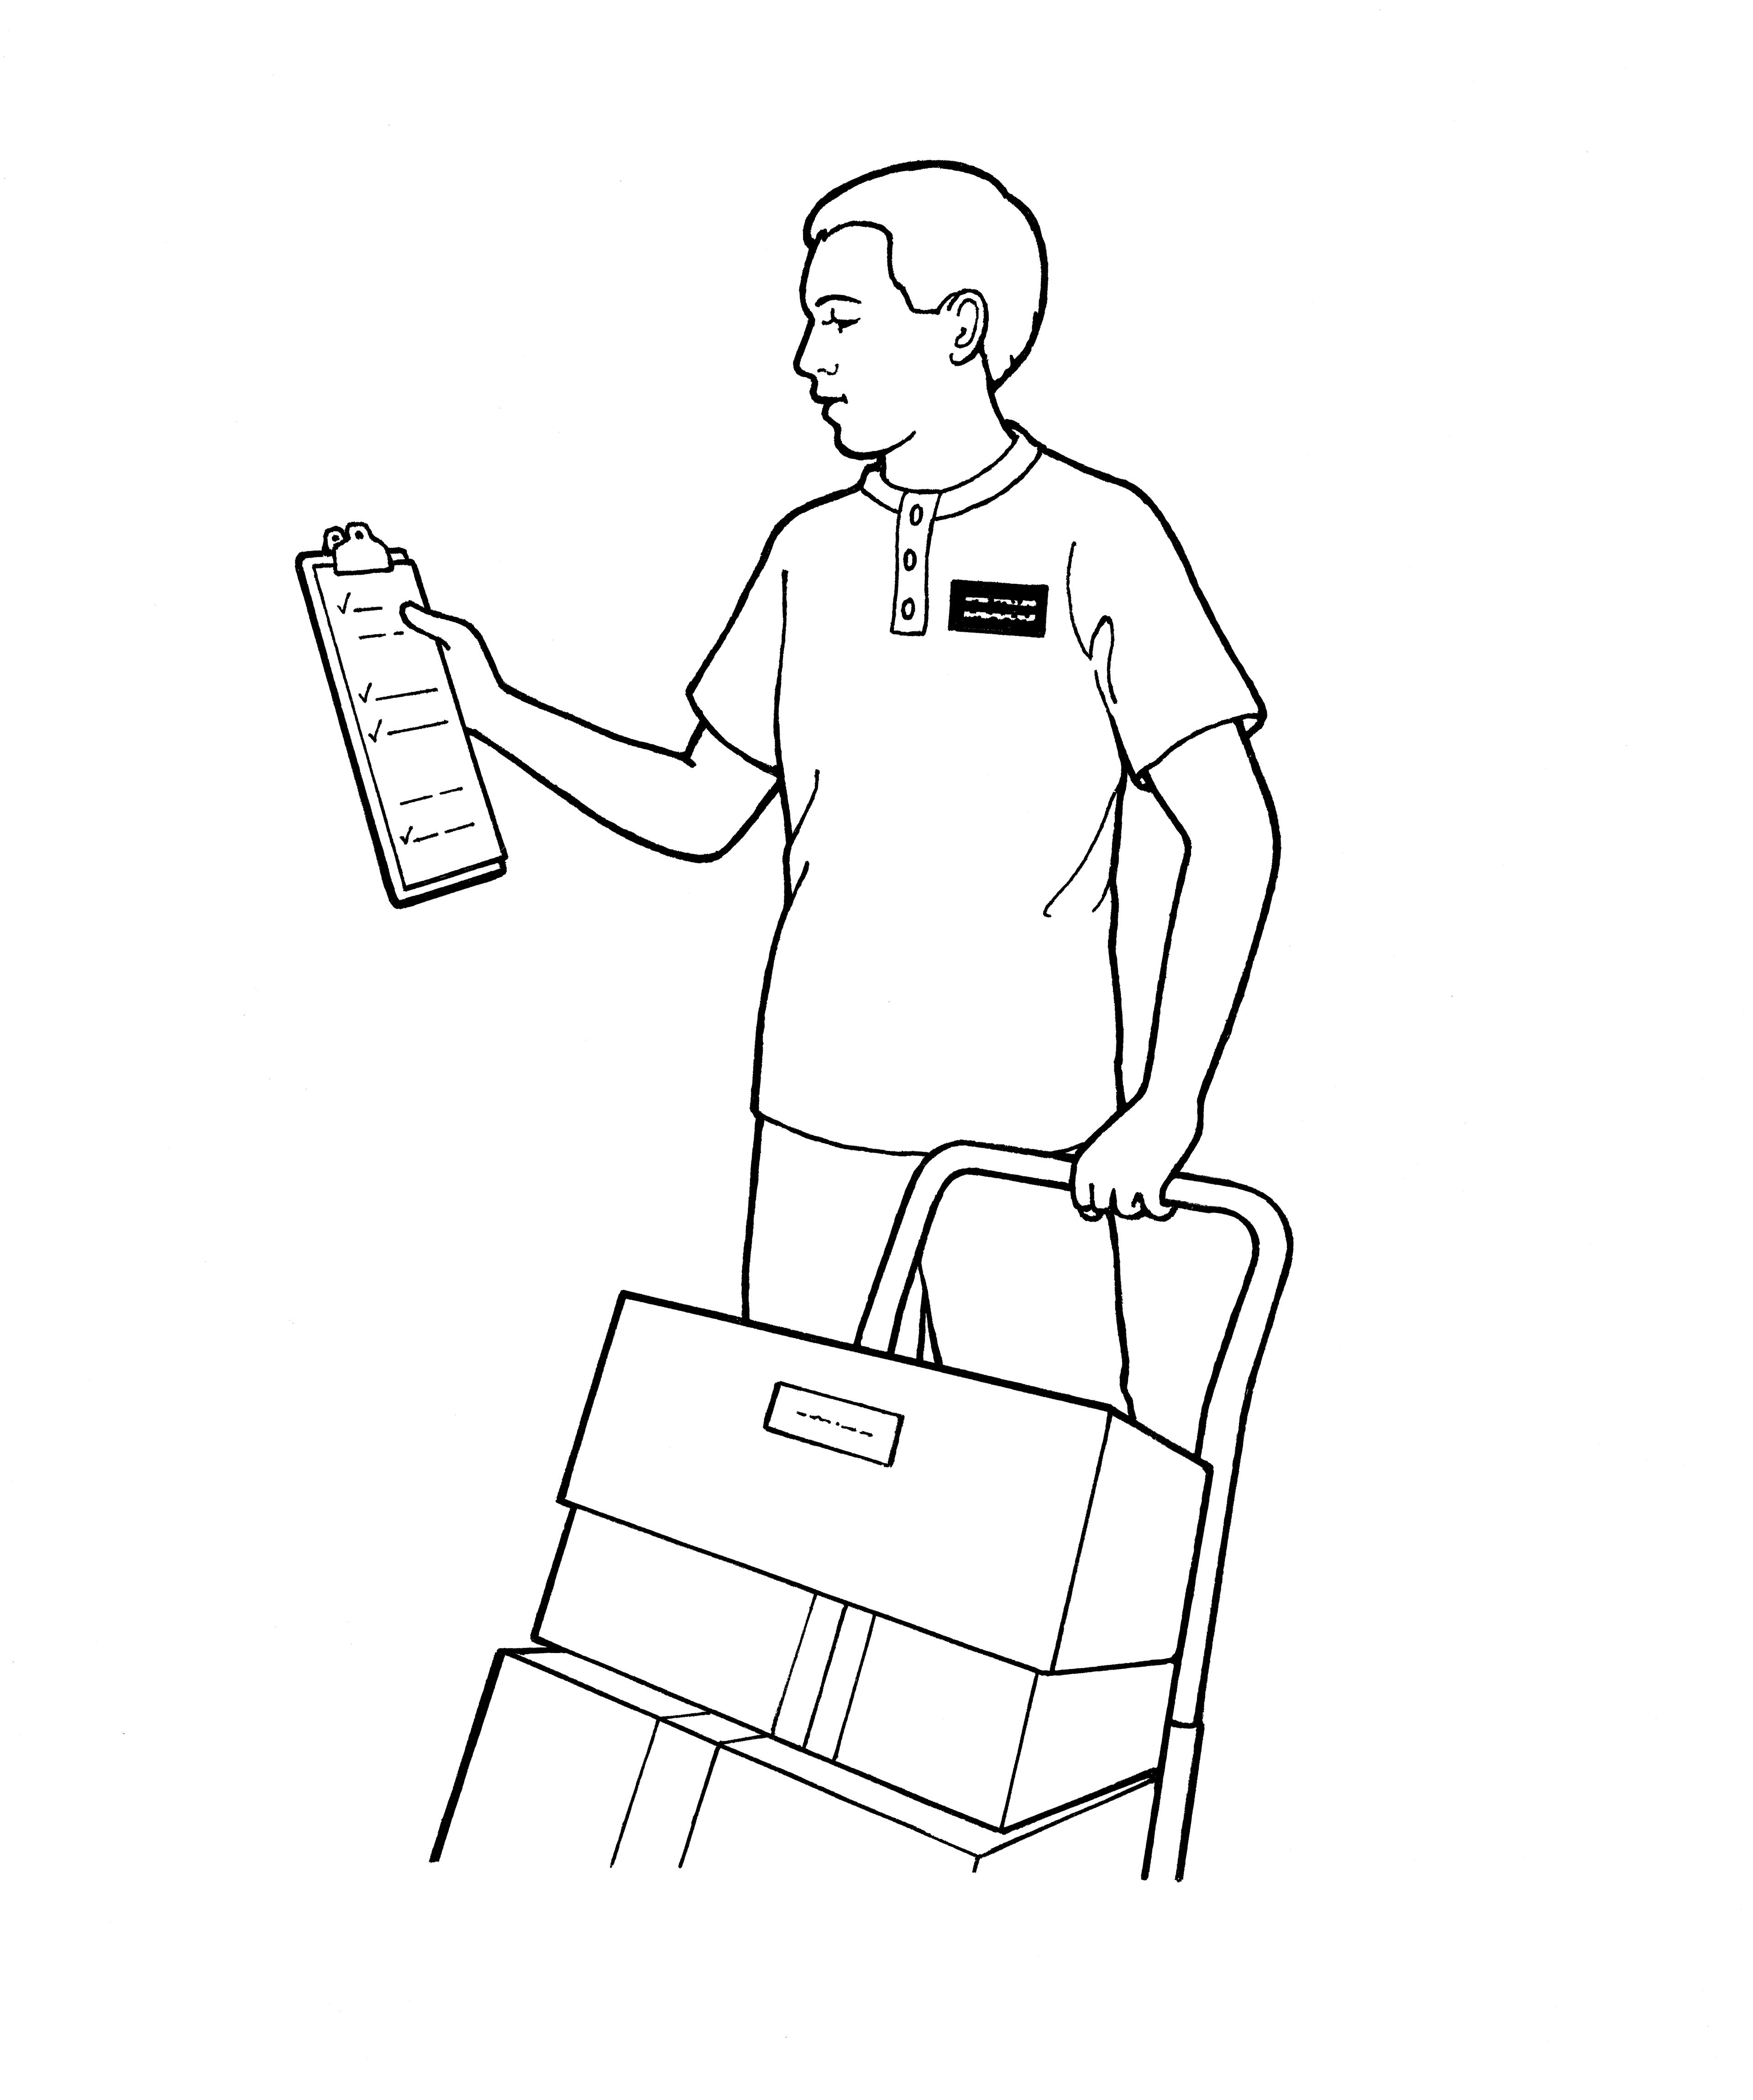 An illustration of a Church-service missionary working with boxes and a clipboard.